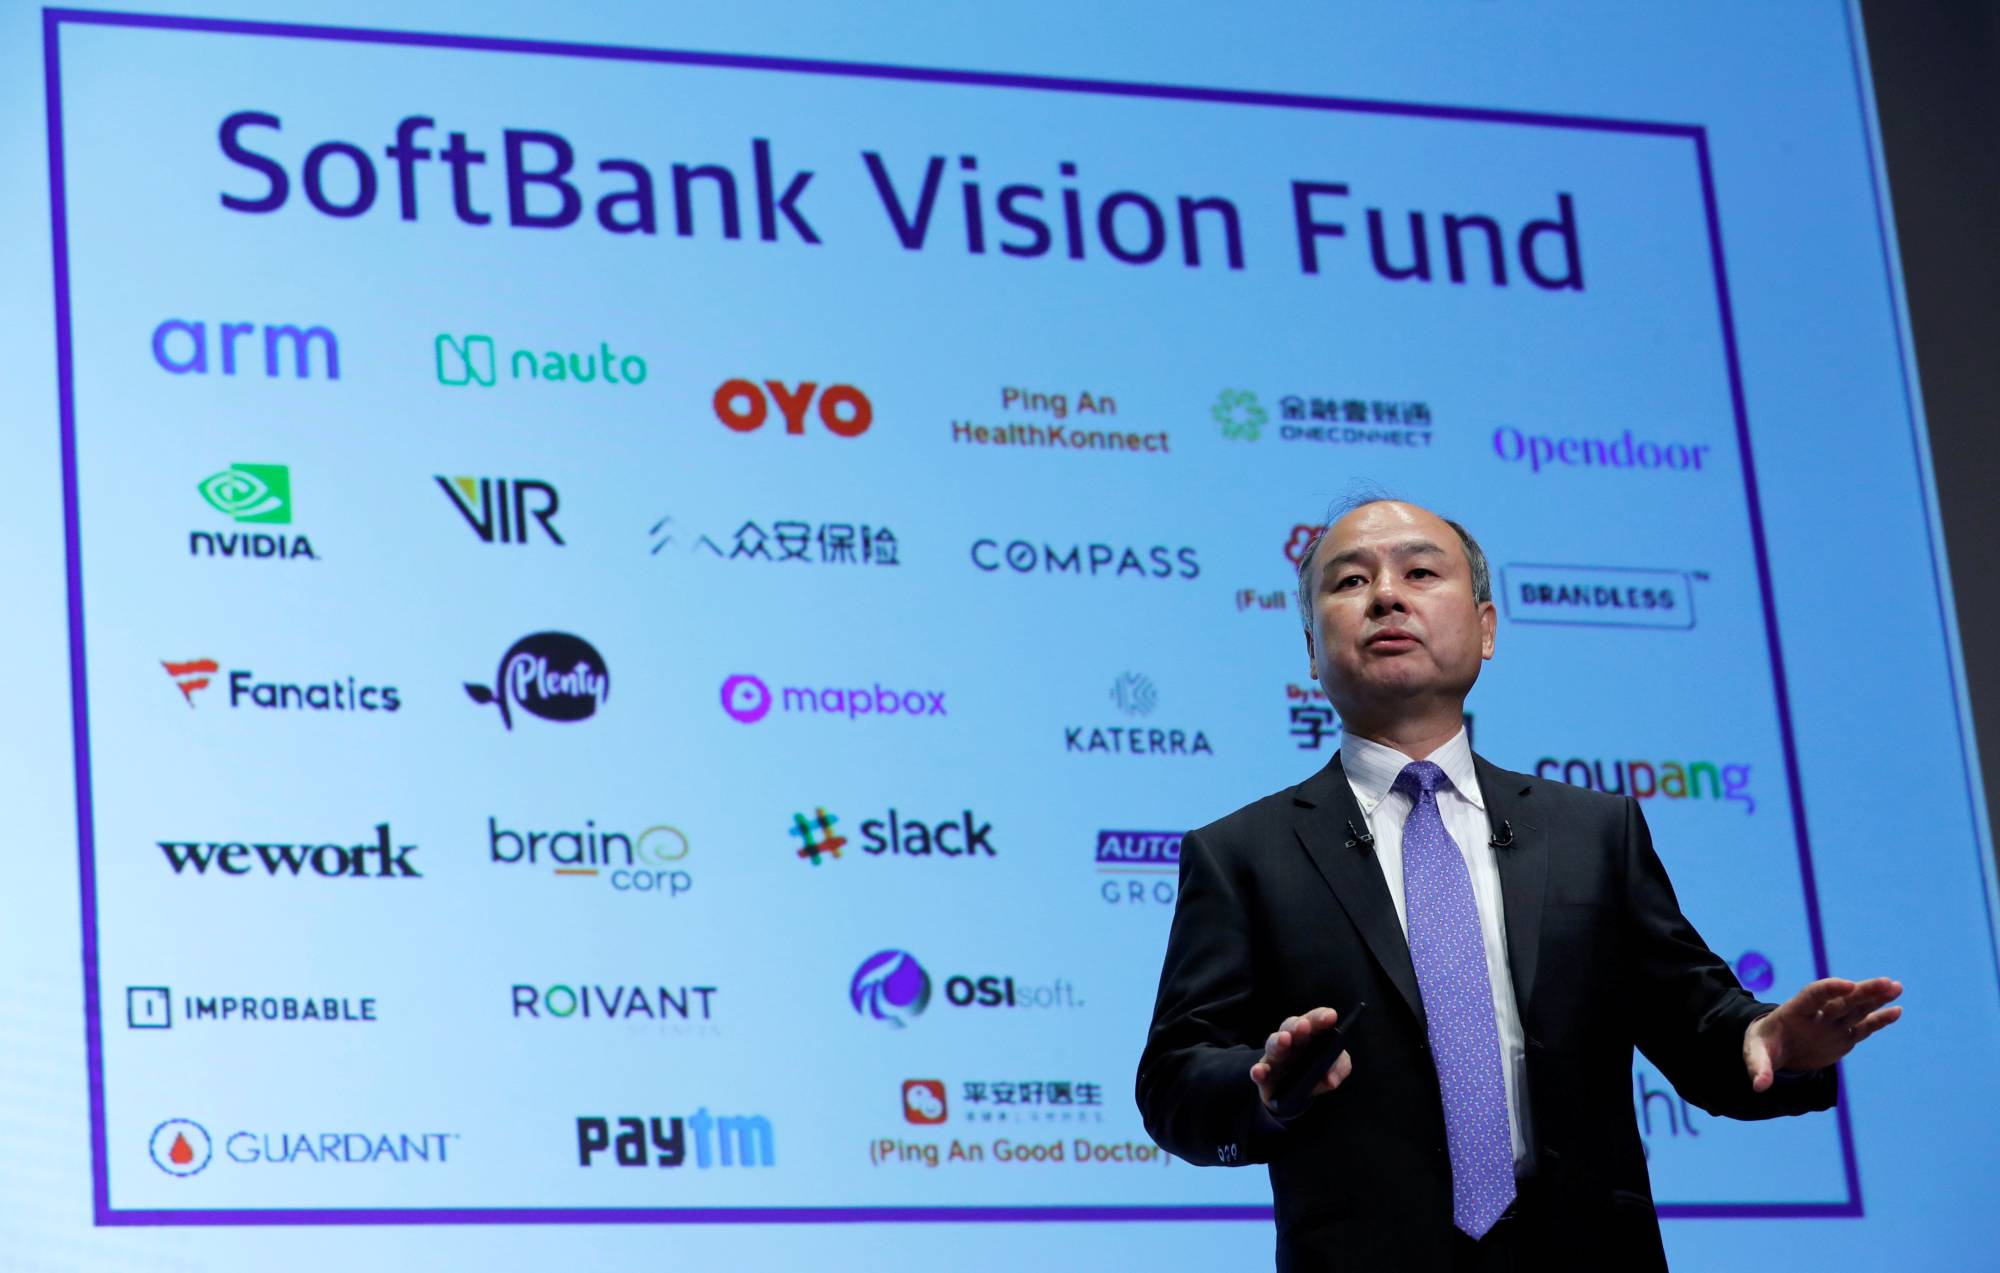 Breaking: SoftBank Plans Another Round of Layoffs at Vision Fund